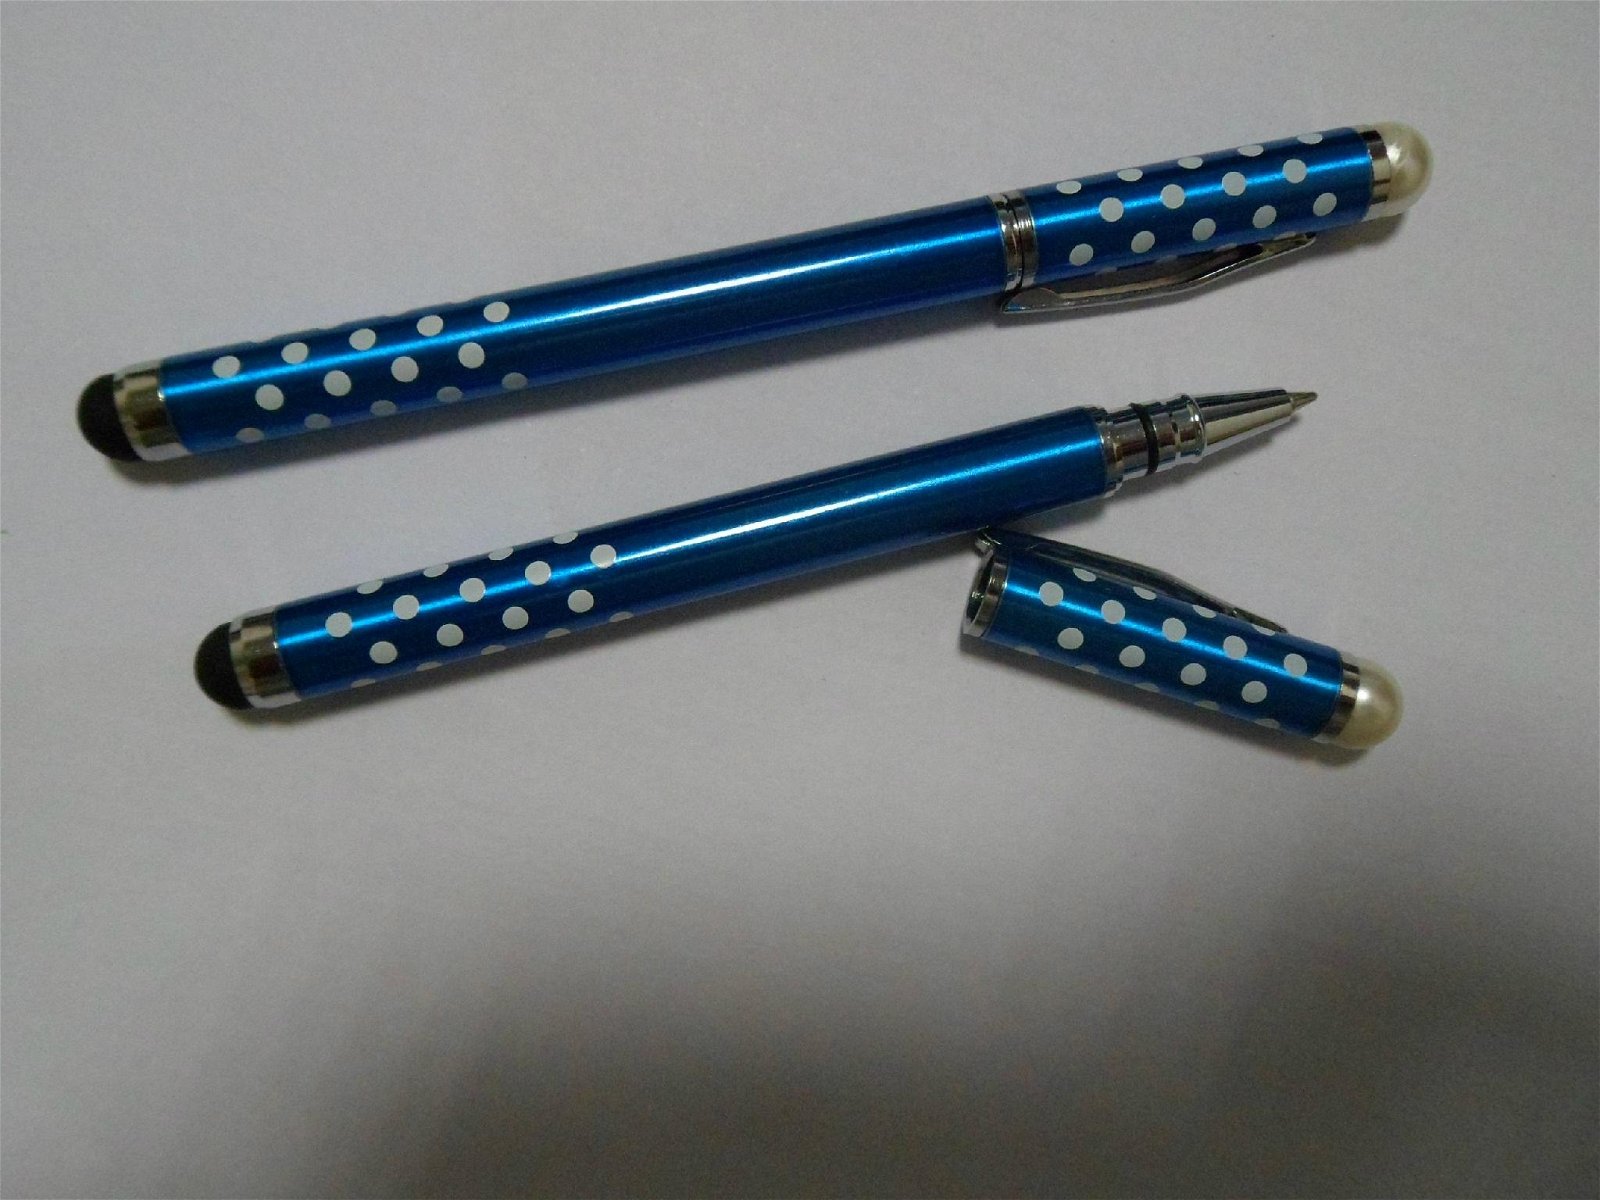 Custom touch capacitance pens Suitable for any capacitive touchscreen devices 3